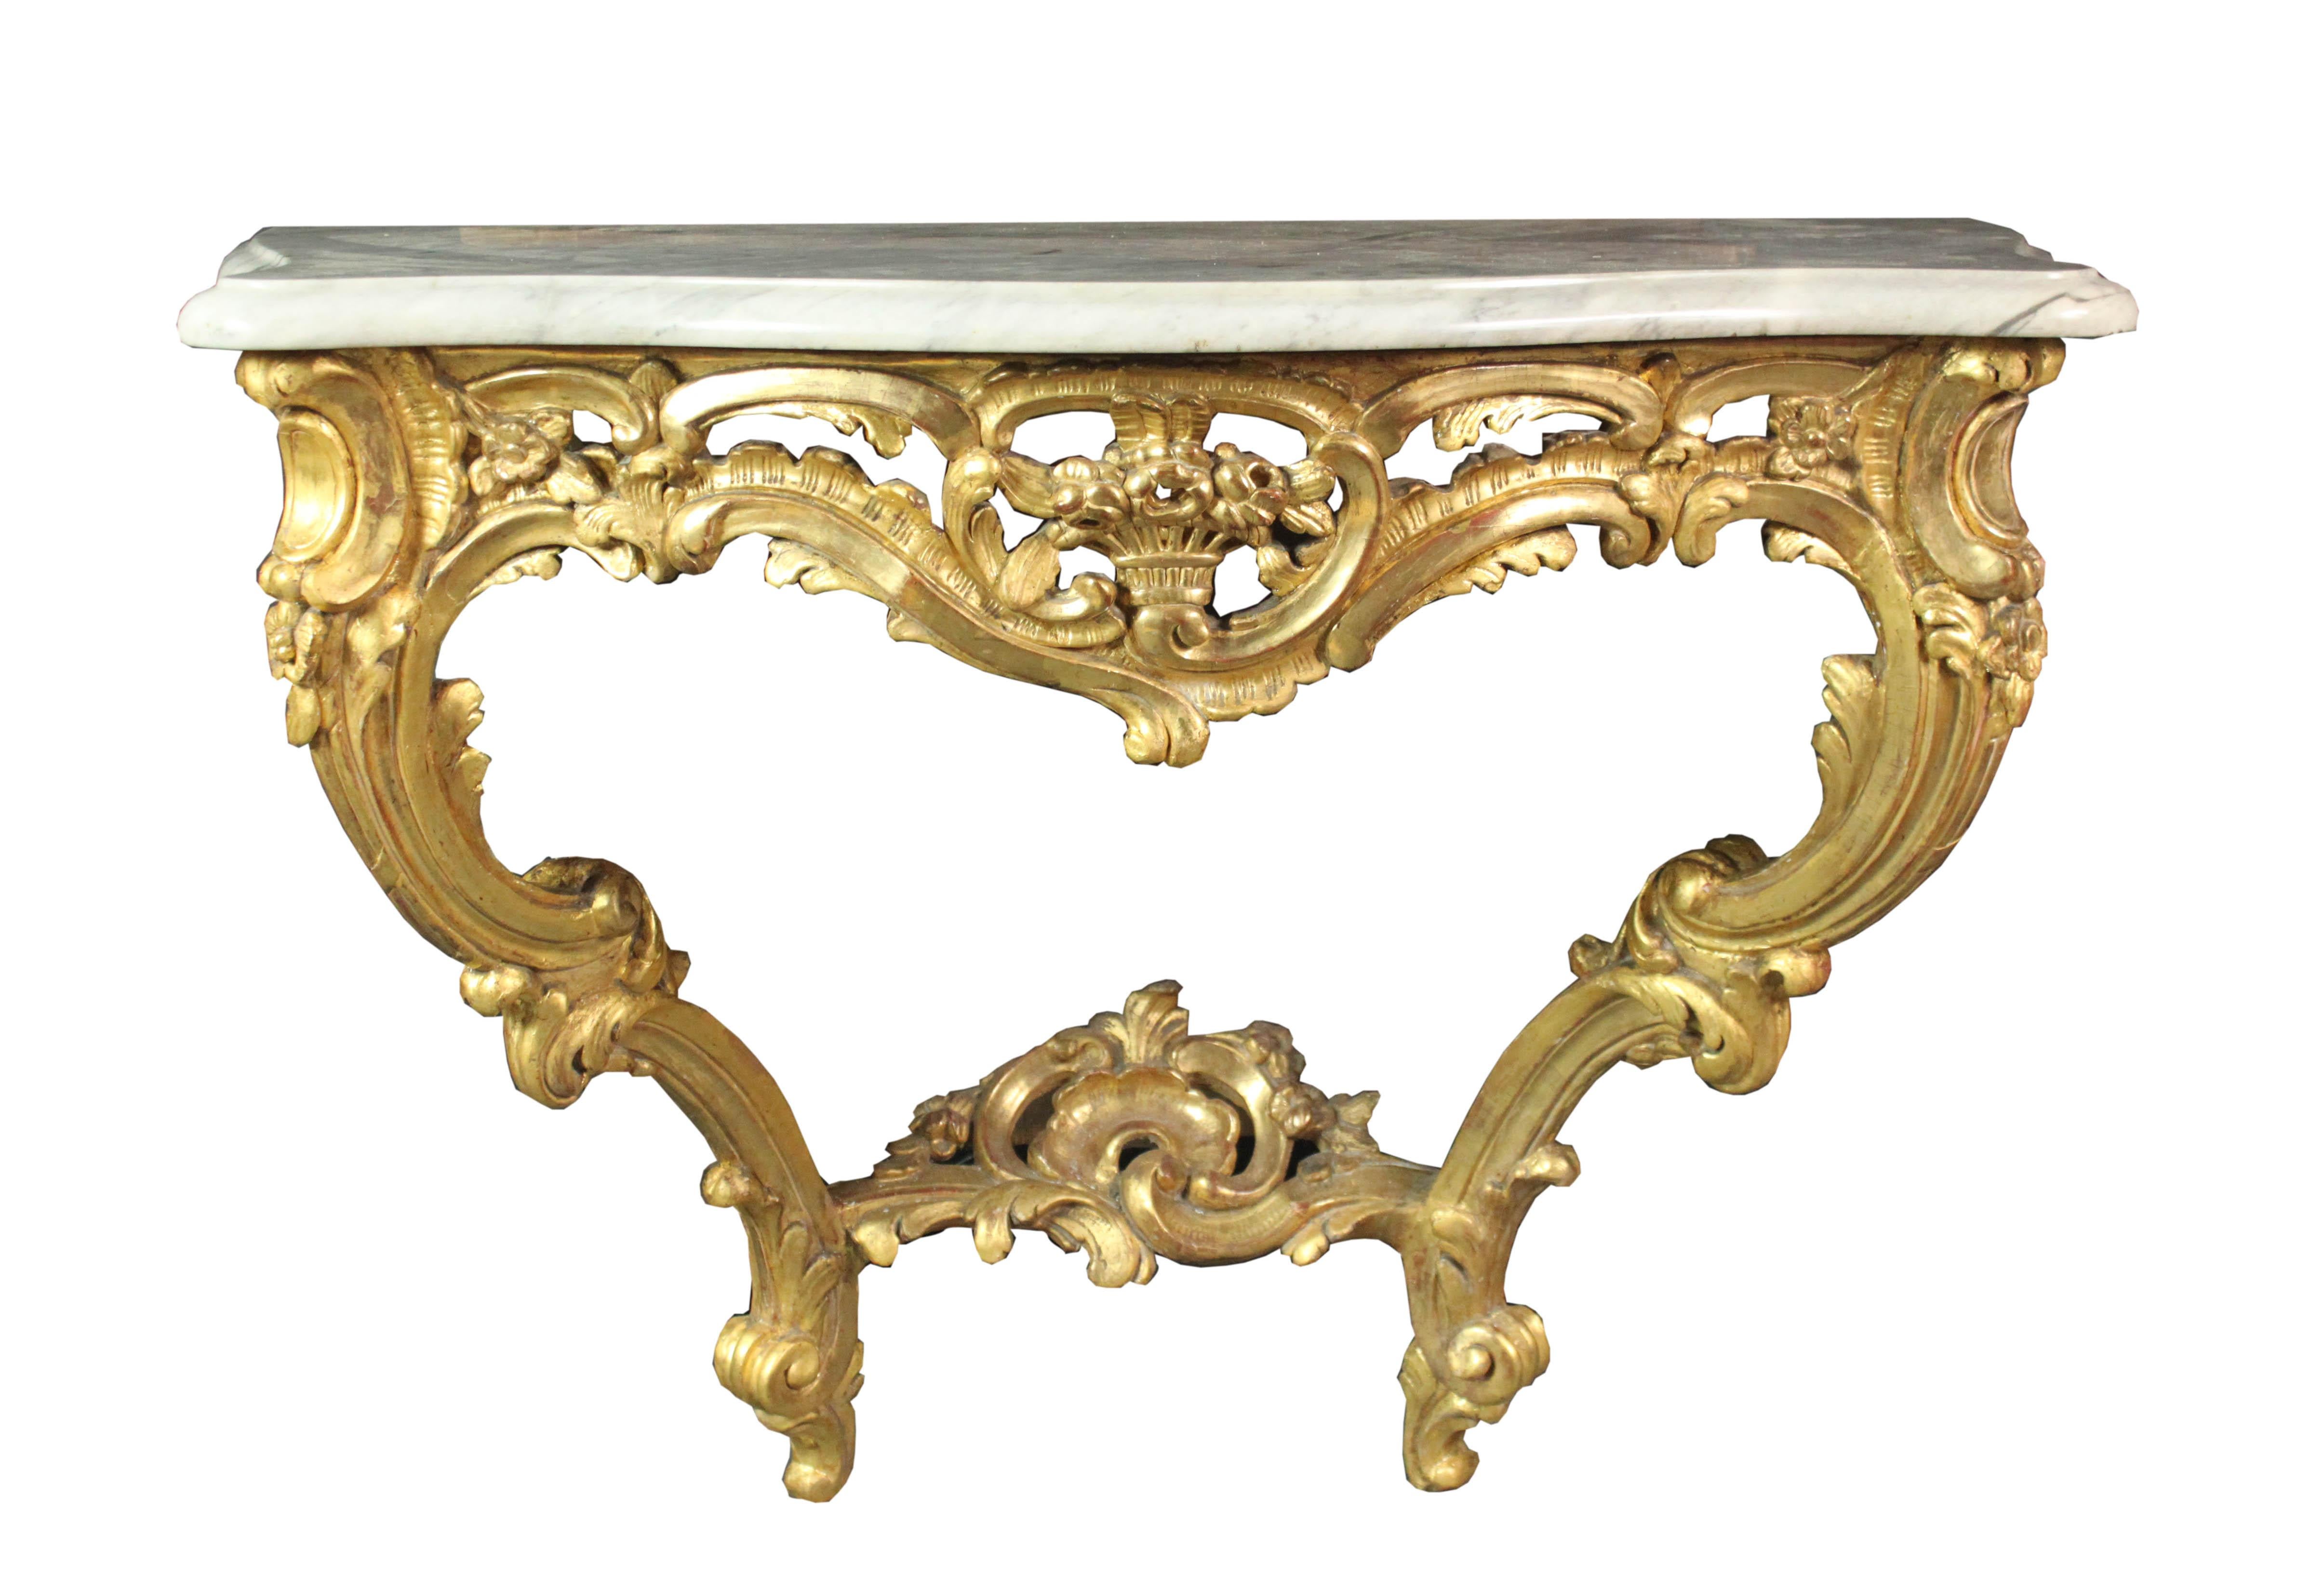 A fine Louis XVI carved giltwood console table and Louis XVI carved giltwood pier mirror. White Carrara marble top. Provenance: bought in a chateau in the Garonne Region, France. Console measures: 43” x 21” x 32” high, mirror 31” x 80” high.